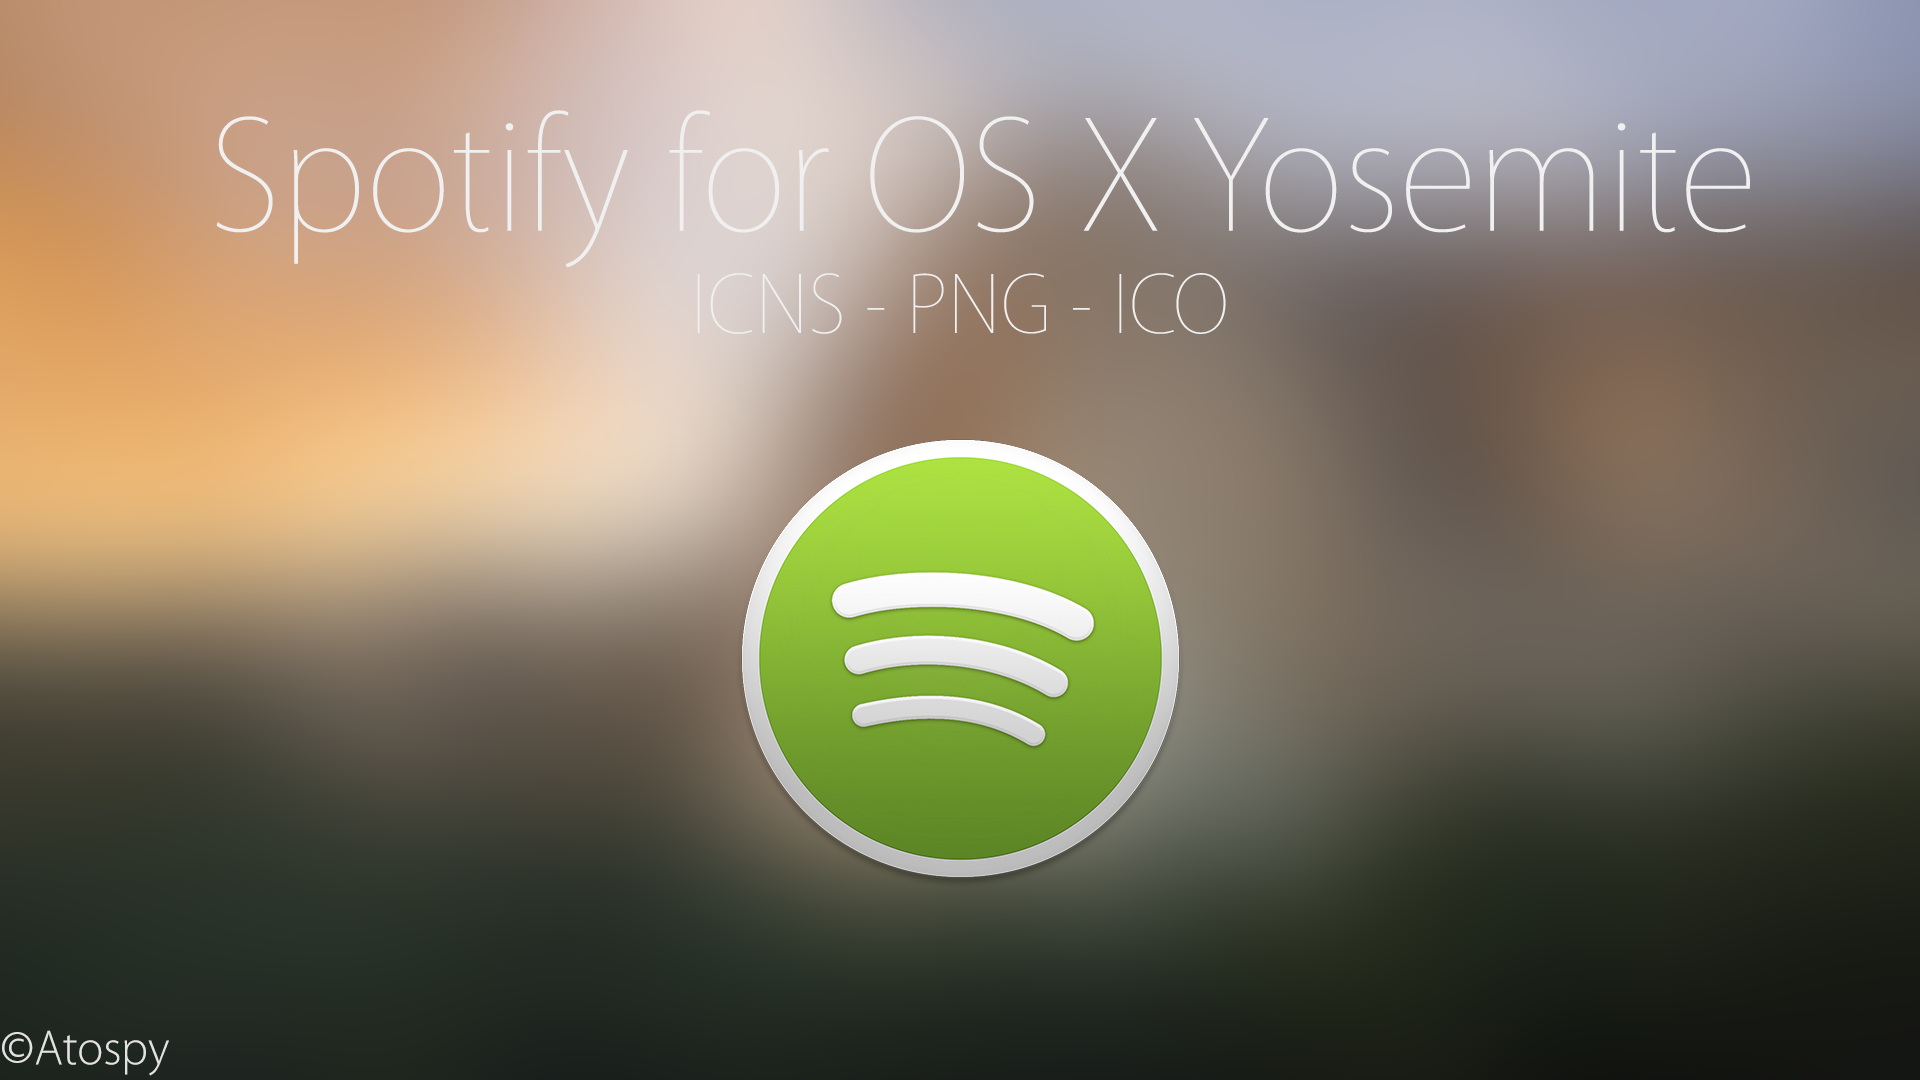 Spotify For Os X Yosemite By Atopsy On Deviantart HD Wallpapers Download Free Images Wallpaper [wallpaper981.blogspot.com]